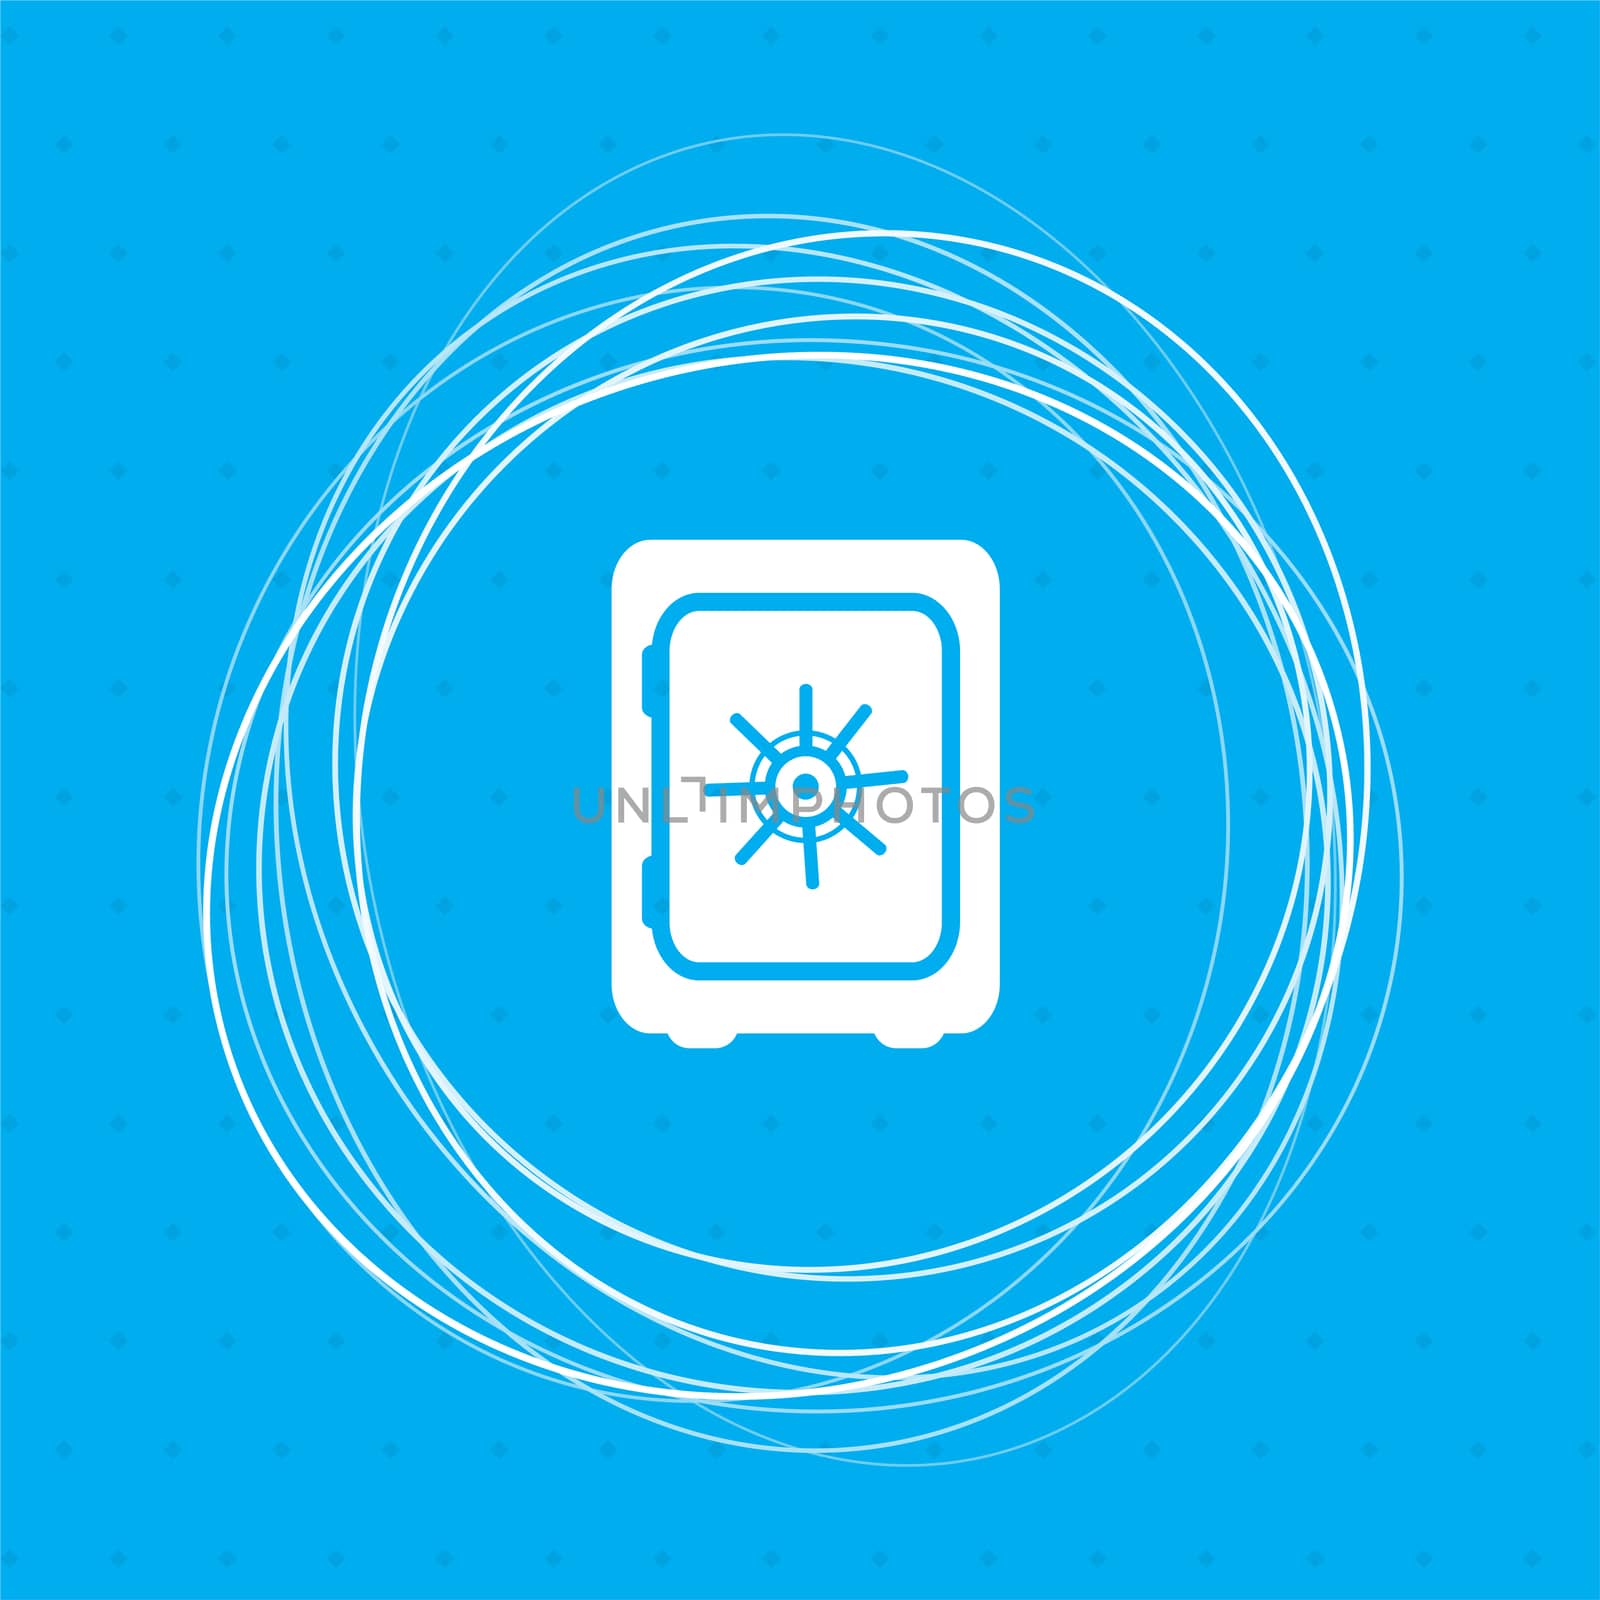 Safe money icon on a blue background with abstract circles around and place for your text. illustration